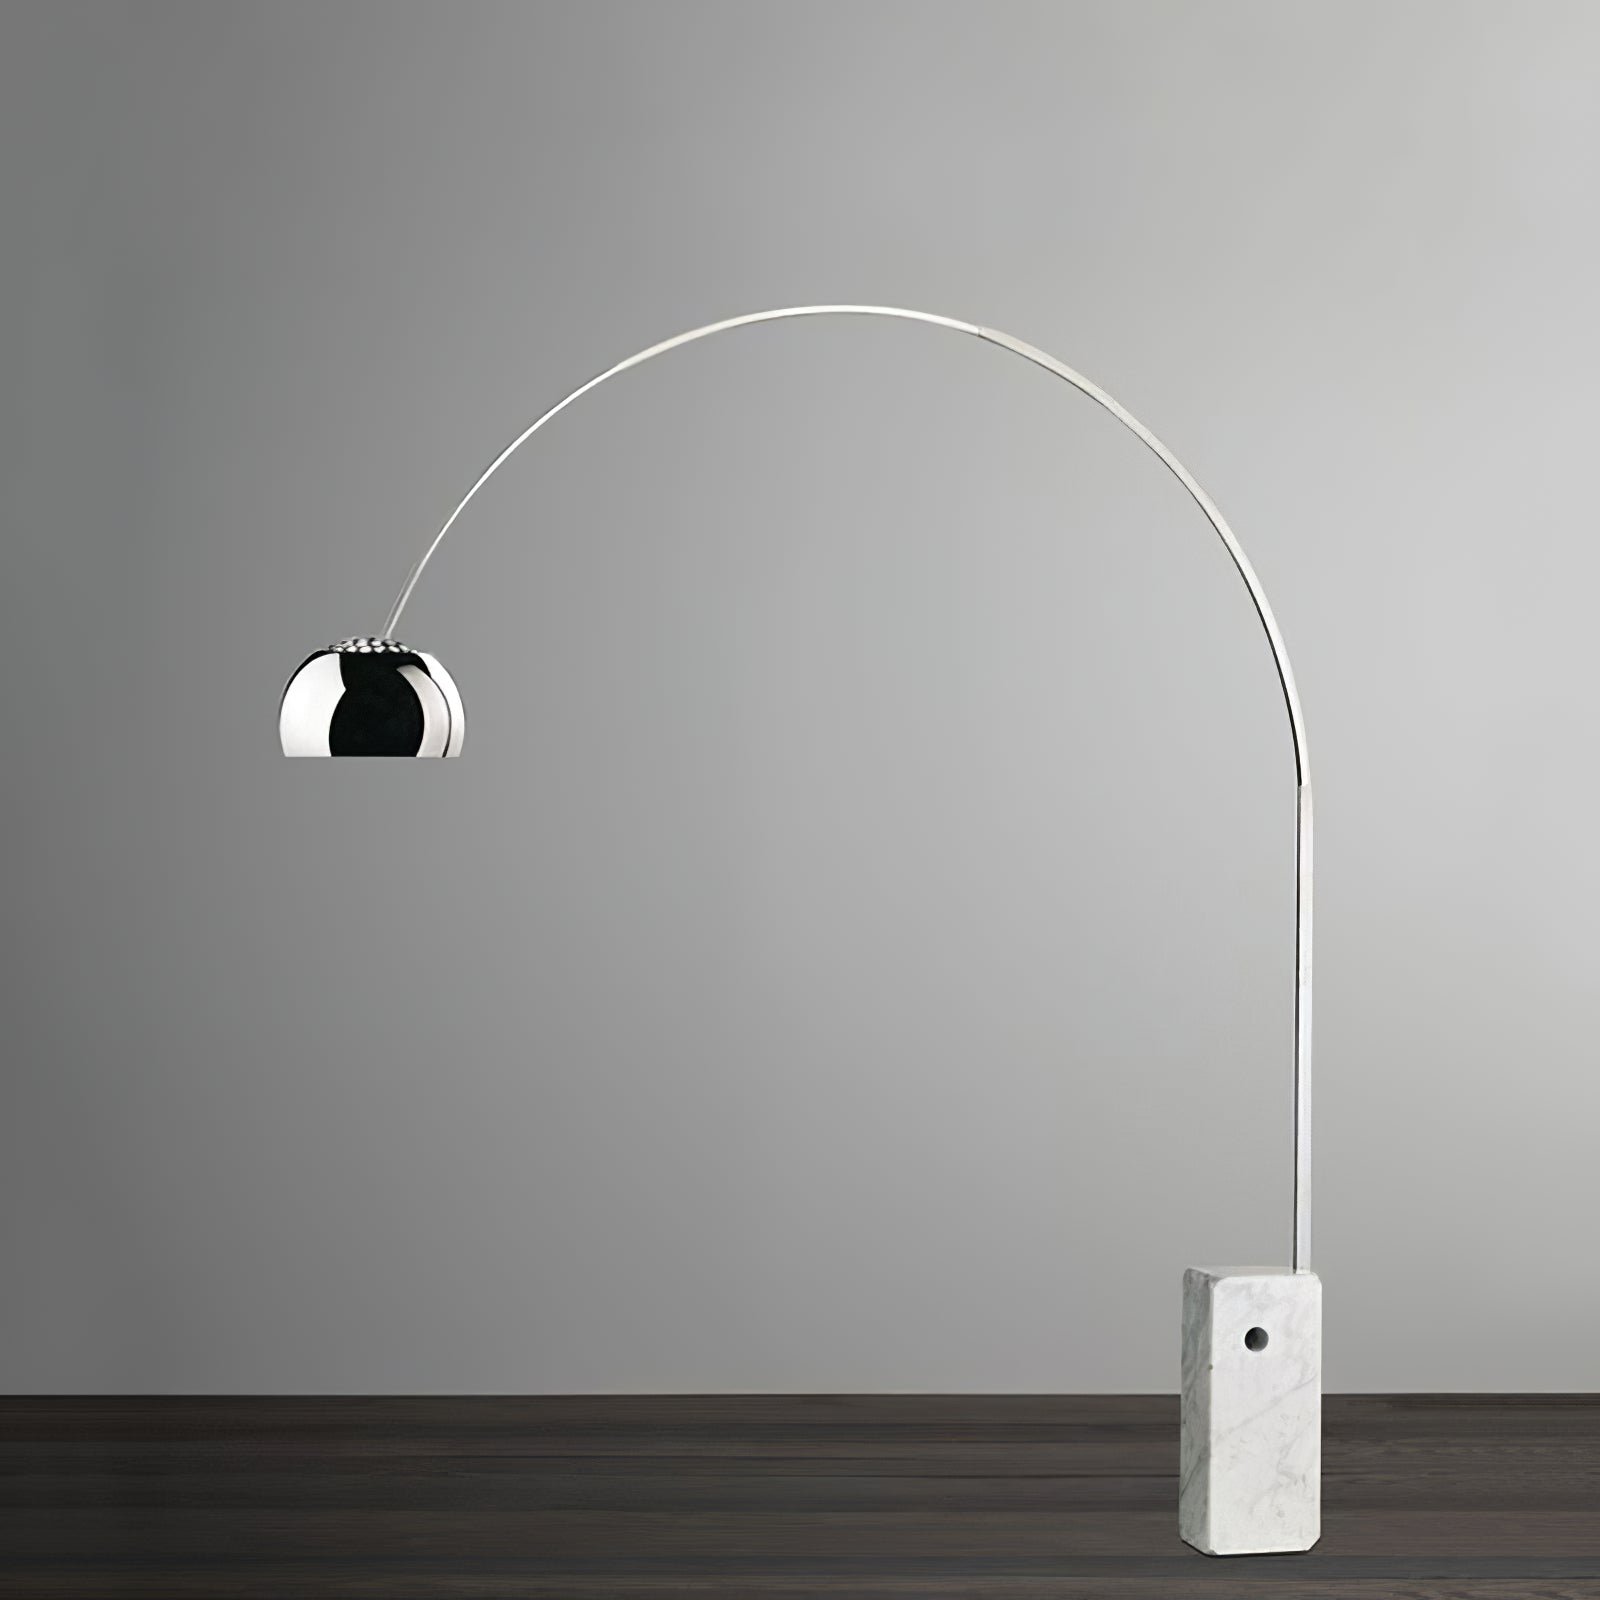 Floor Lamp Arco, with dimensions of 82.6″ x 96.4″ (210cm x 245cm), featuring Square Tube Design and equipped with UK plug.